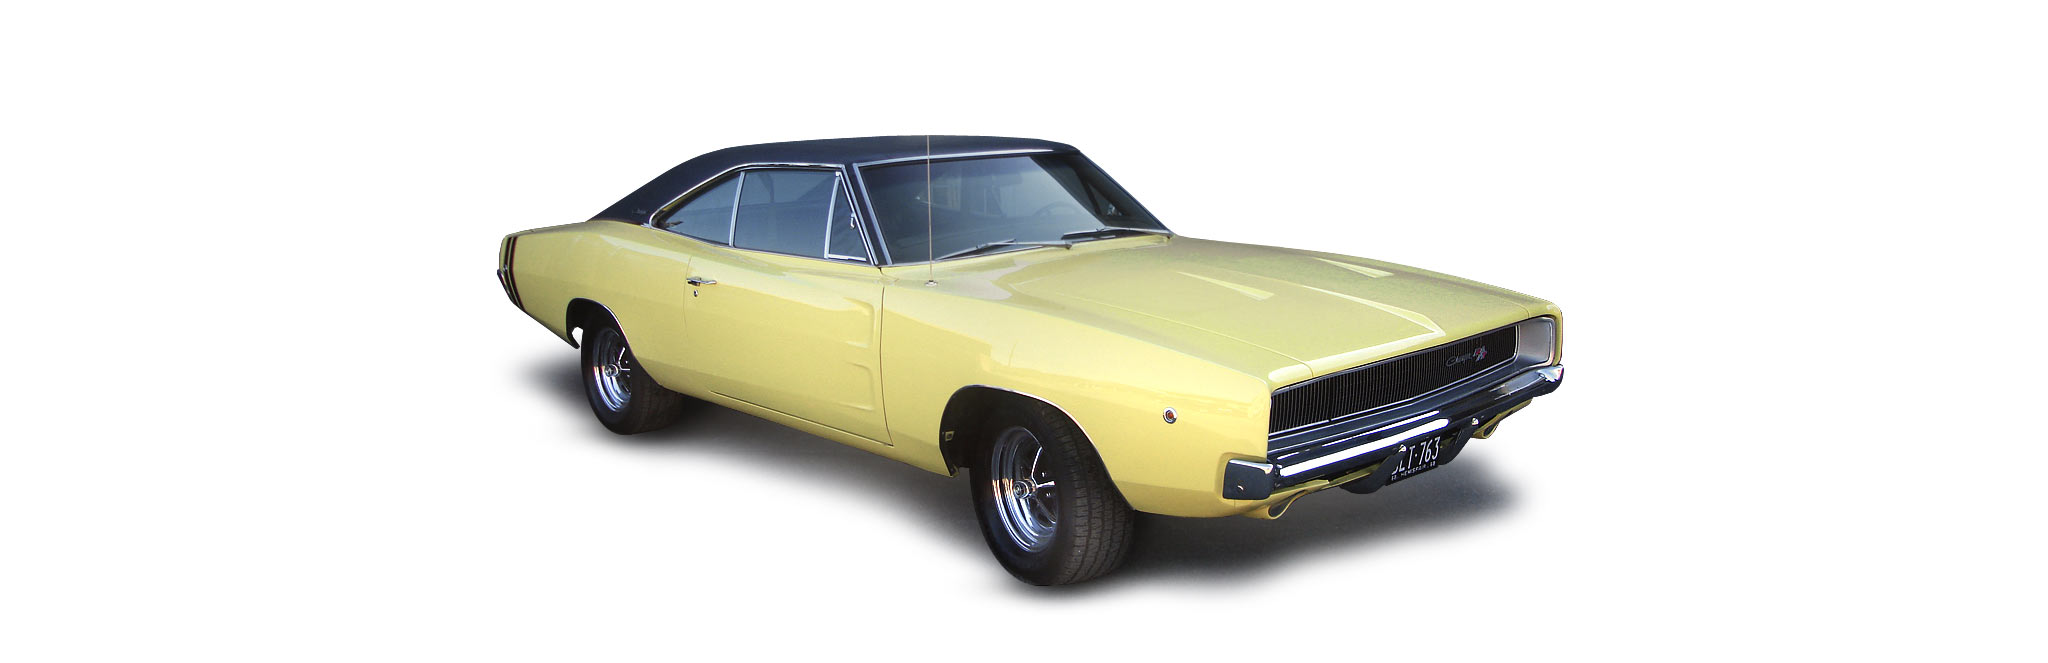 RELIC restored 1968 Dodge Charger RT internal page